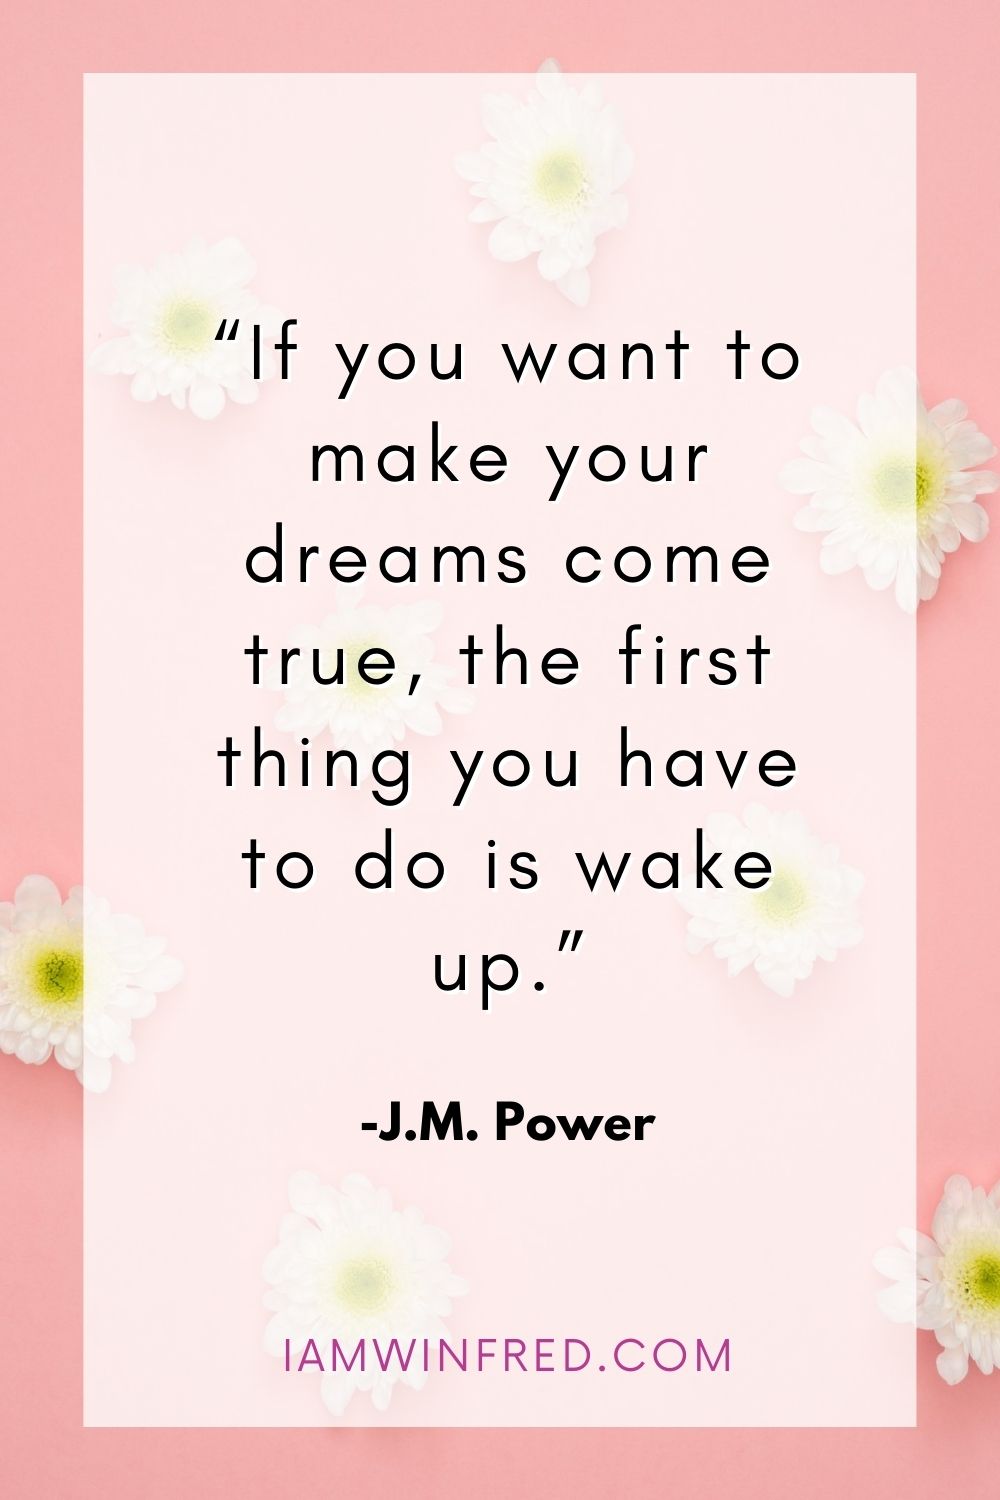 If You Want To Make Your Dreams Come True The First Thing You Have To Do Is Wake Up.